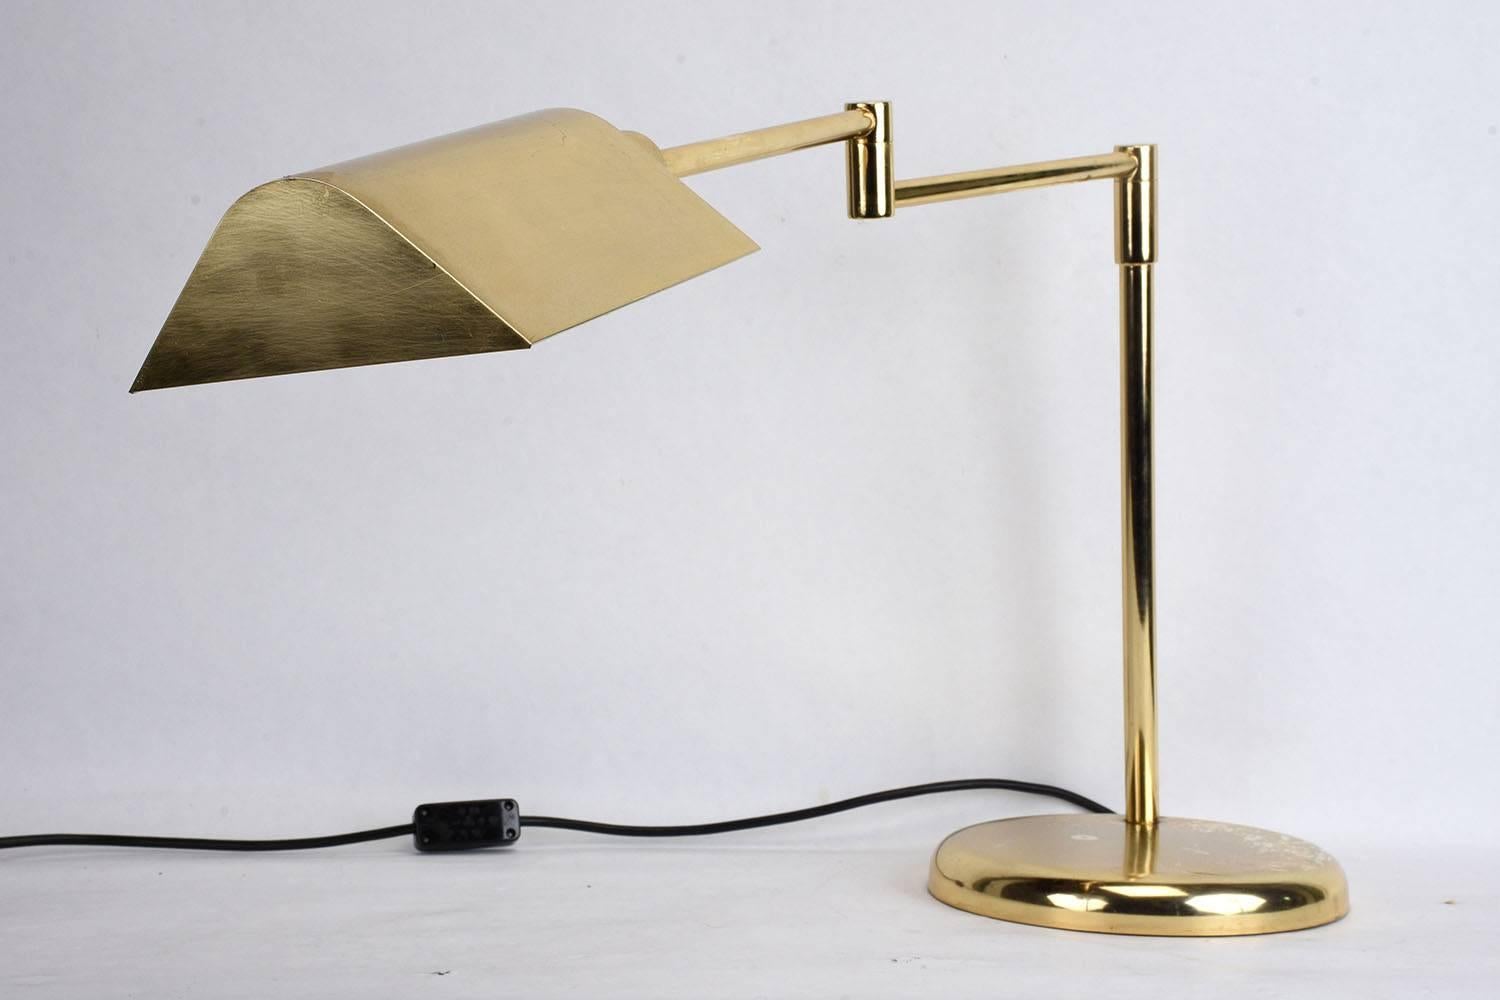 This 1960s vintage Modern-style table or desk lamp is made by Koch and Lowy. The brass-plated steel lamp features an adjustable arm for user convenience, the lamp is wired to US standards and is in working condition. This desk lamp is sturdy,